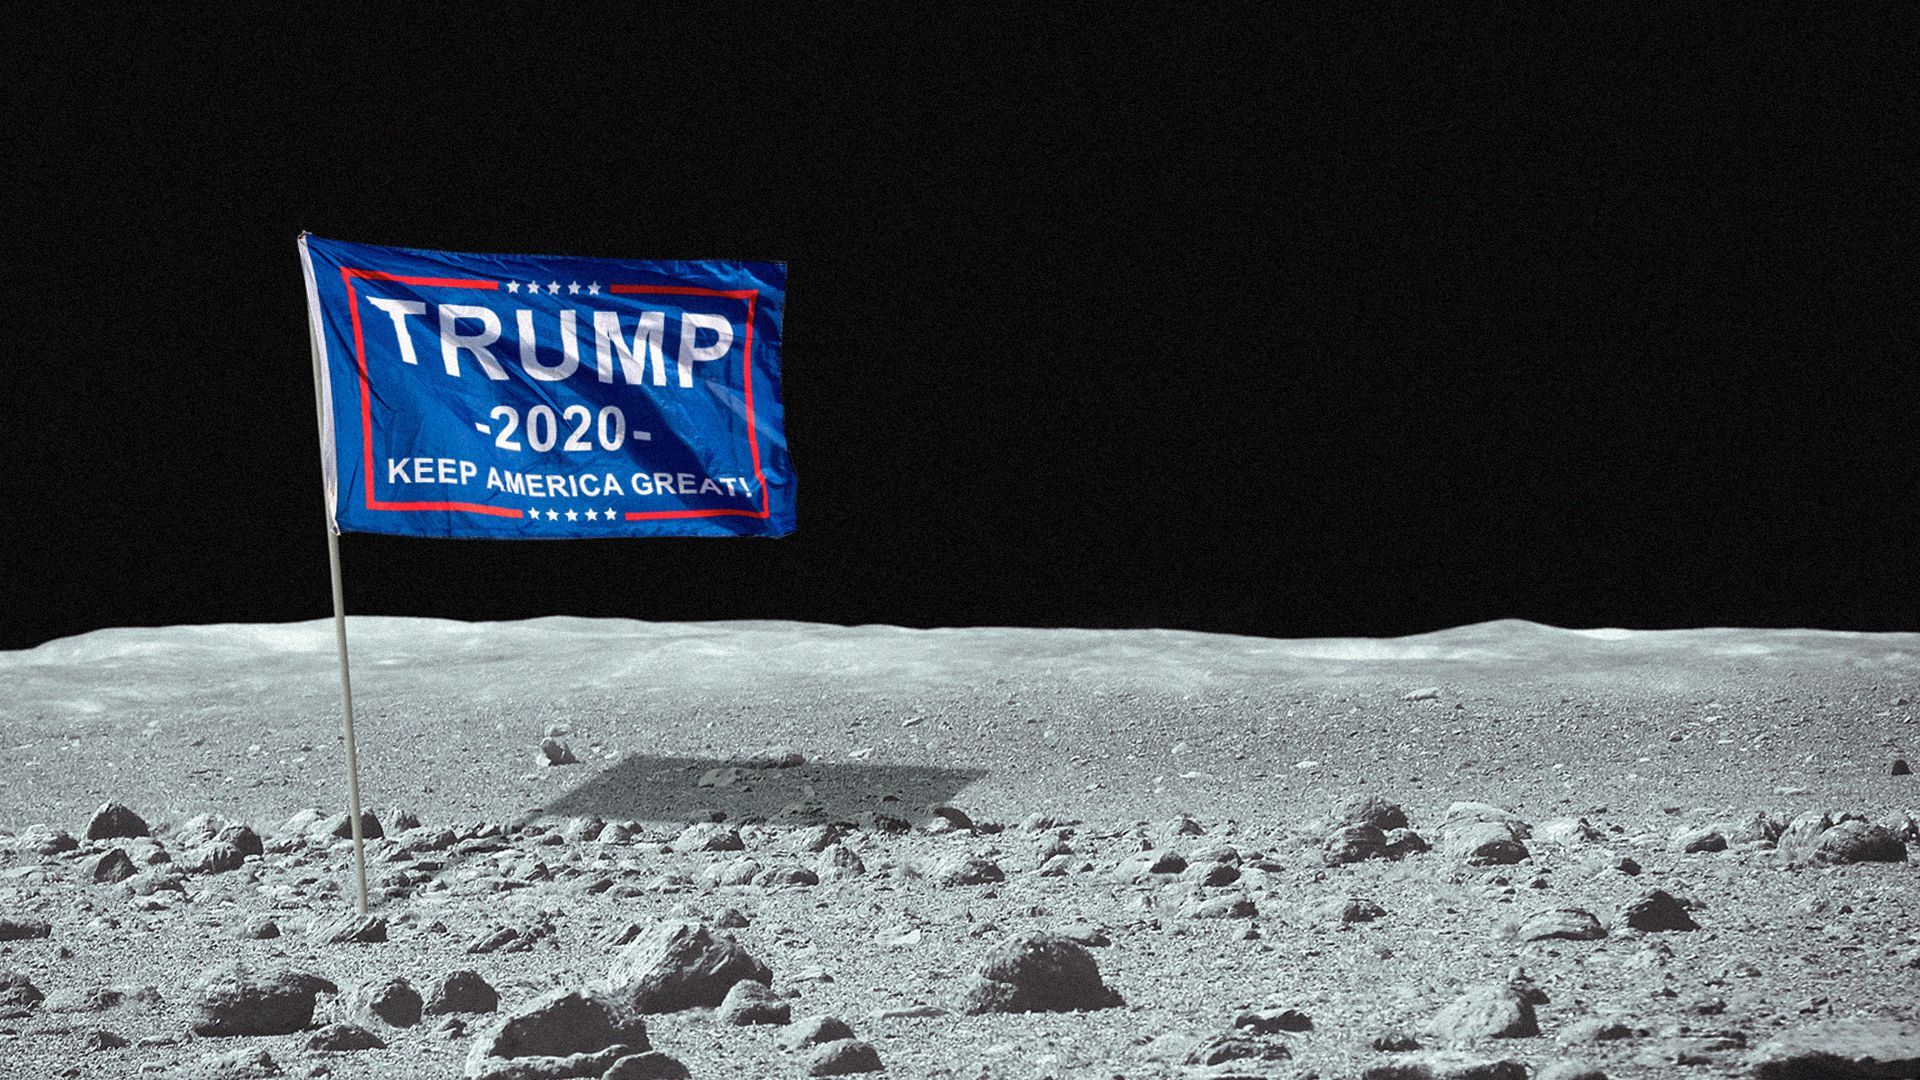 Illustration of a "Trump 2020 Keep American Great" flag on the Moon. 